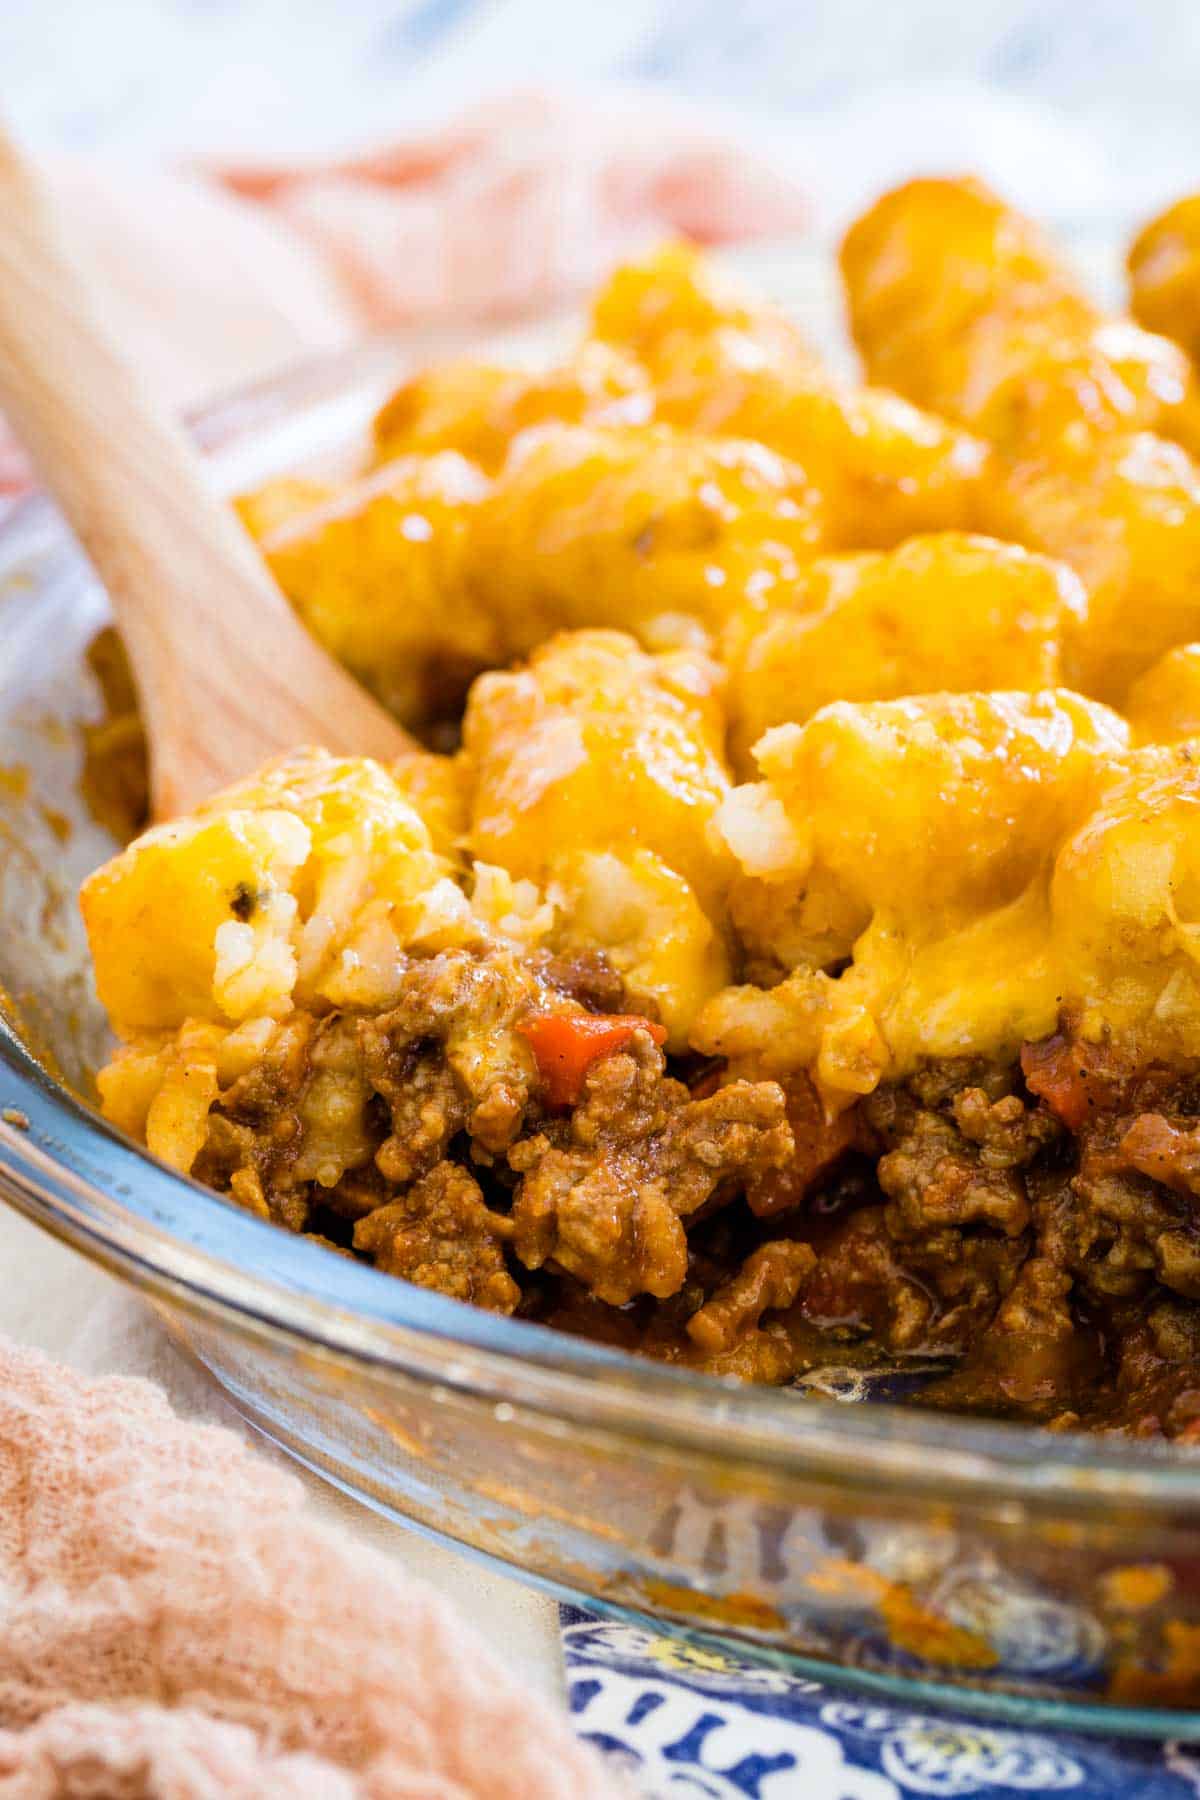 A wooden spoon scoops a serving of sloppy joe tater tot casserole from a baking dish.